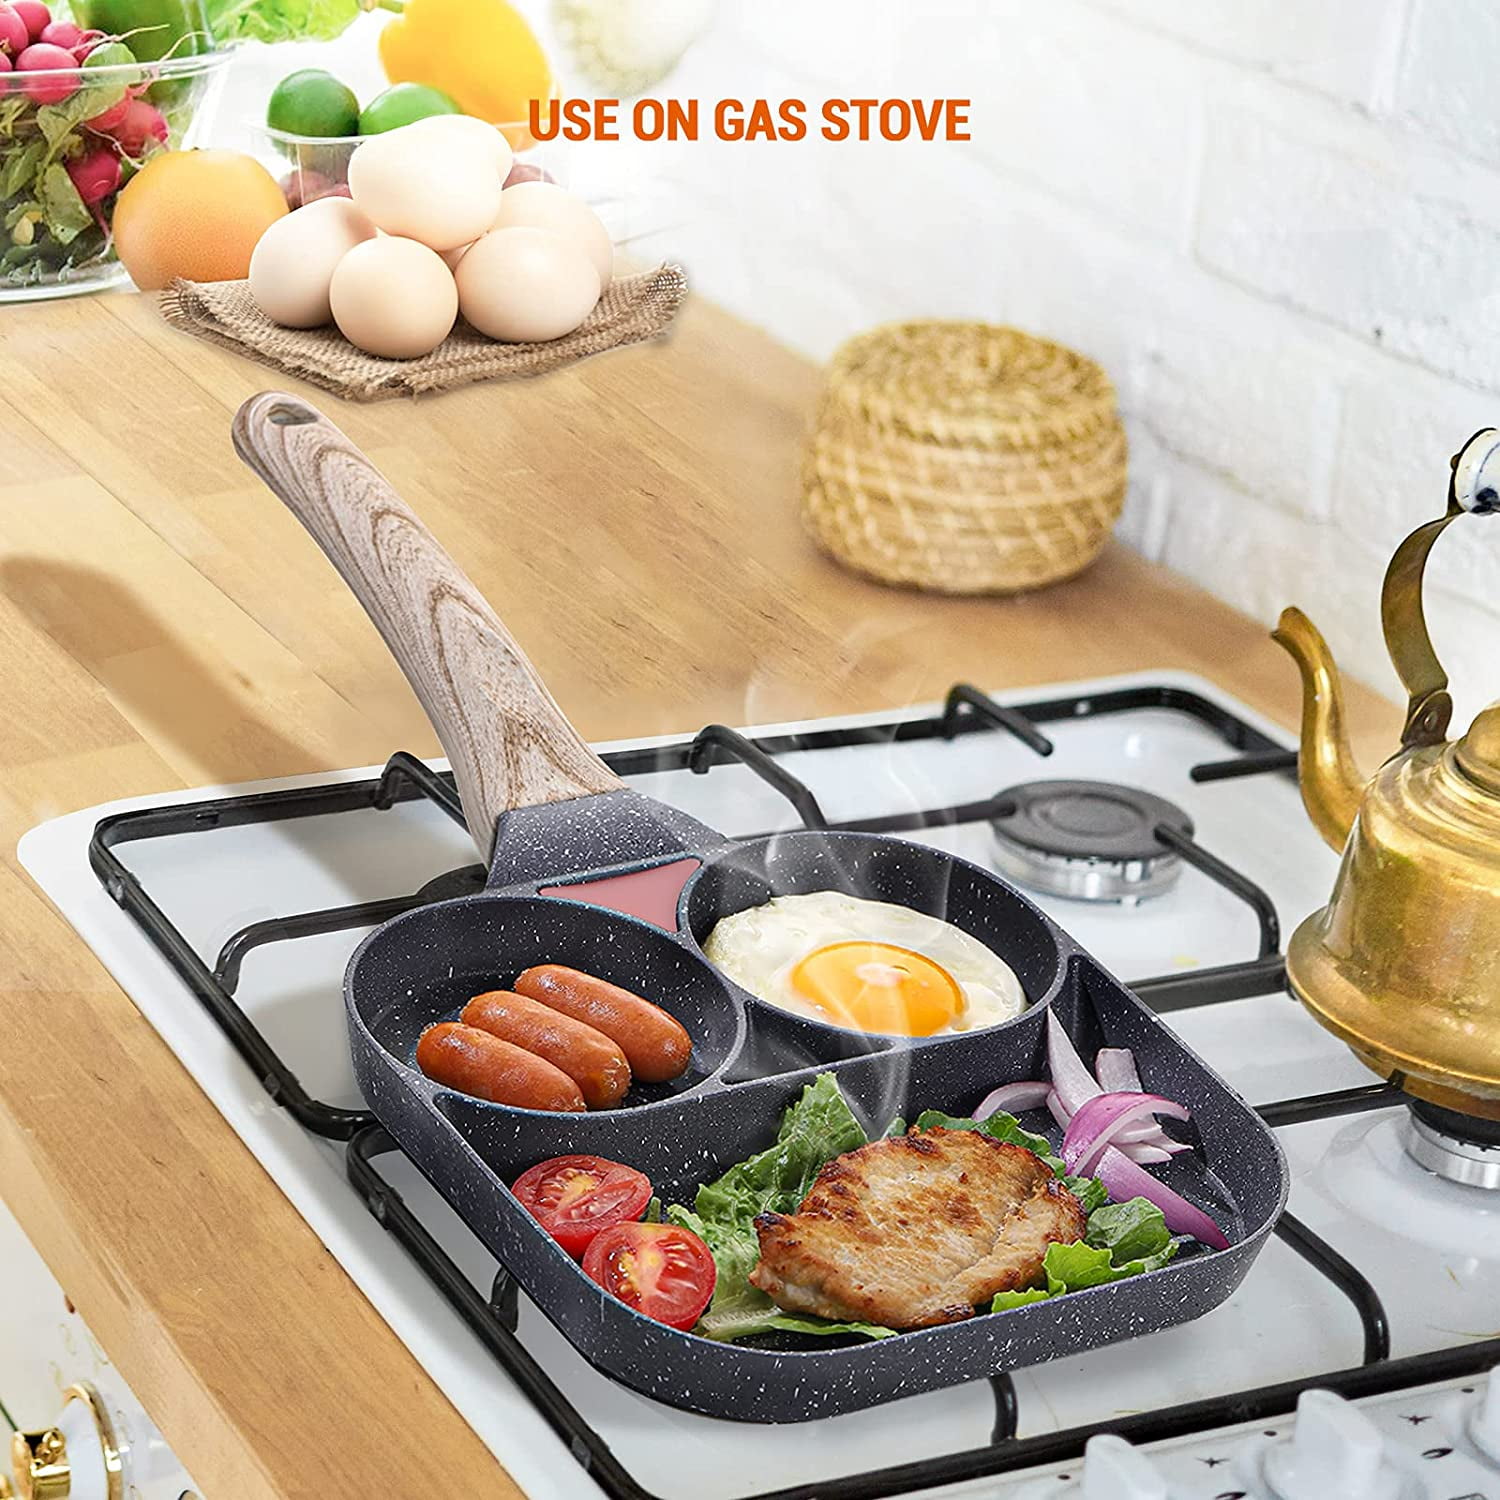  3 Section Pan Skillet - Square 3 in 1 Breakfast Pan - 10 inch  Frying Pan Nonstick - All in One Split Sectioned Pan - Divided Pan for  Cooking Egg Bacon Veggies: Home & Kitchen